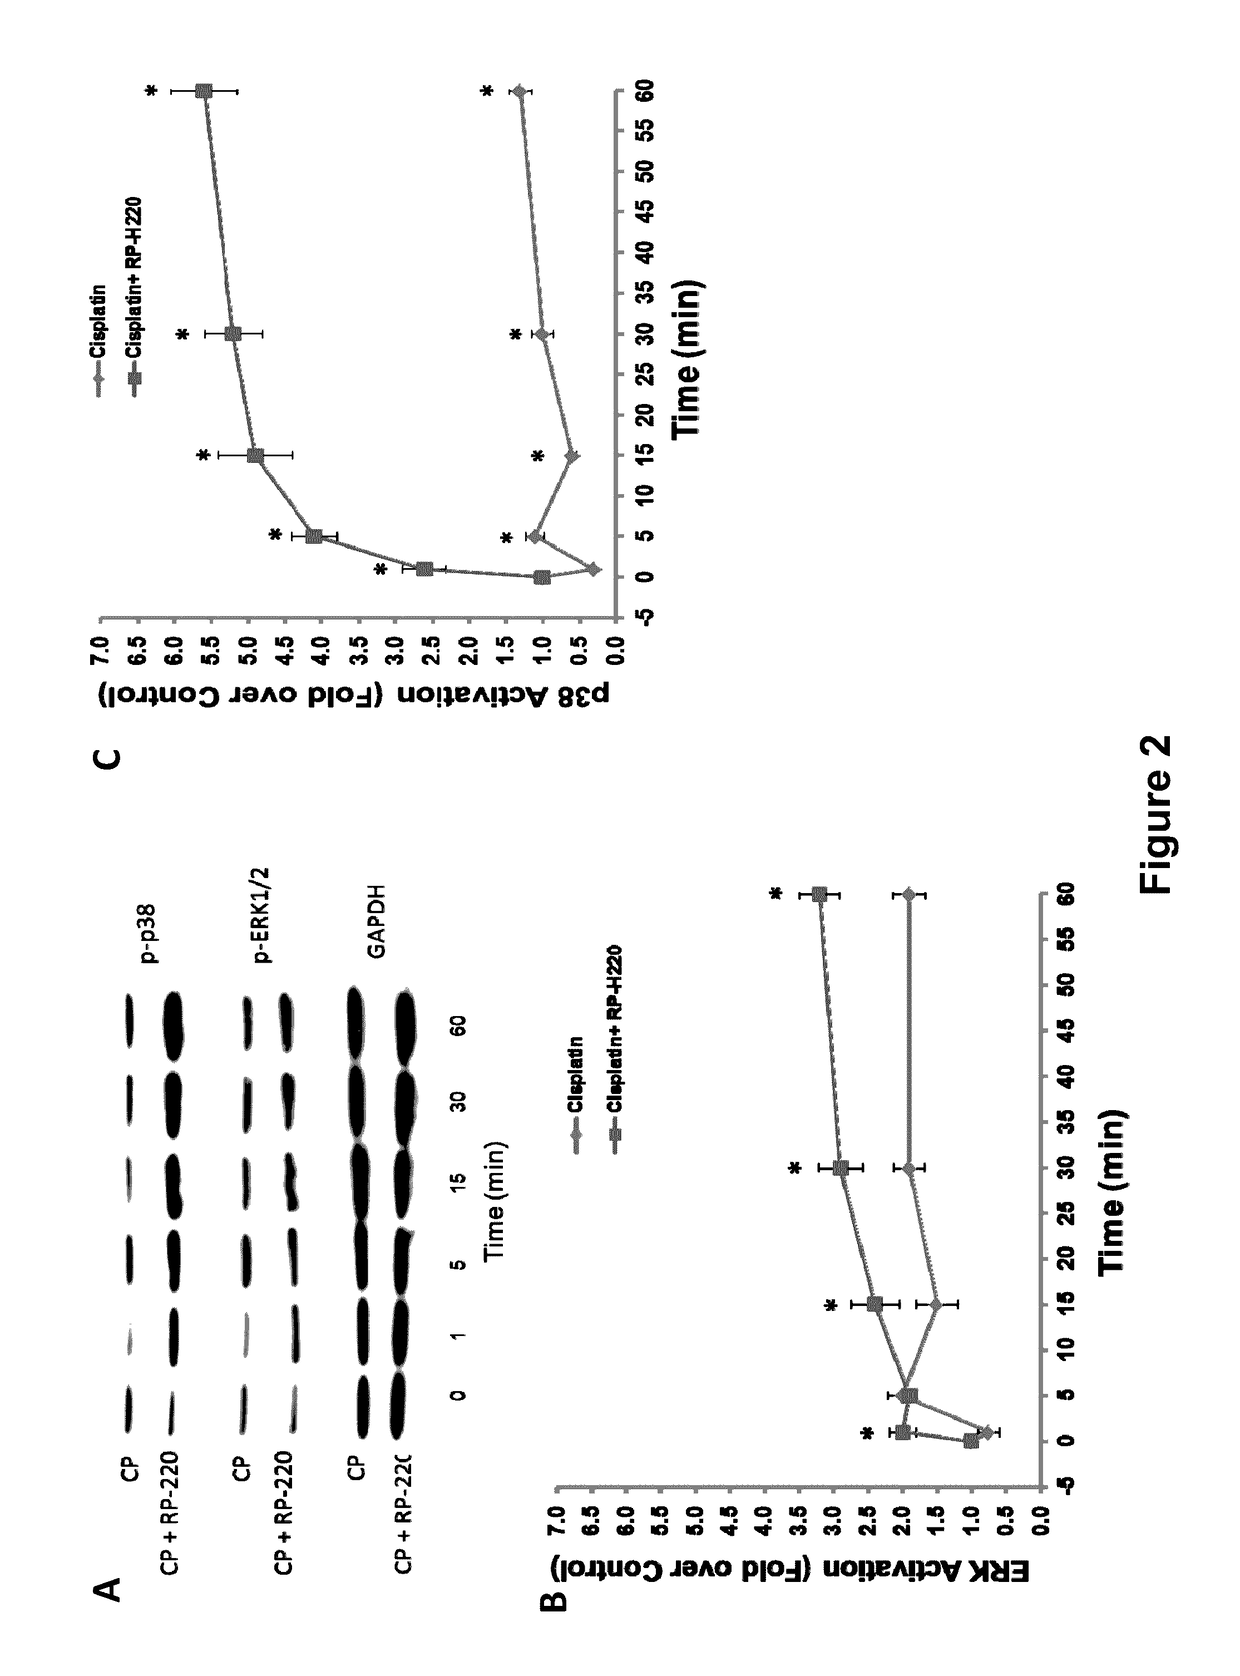 Compositions and Methods for Treating and Preventing Pancreatitis, Renal Injury and Cancer